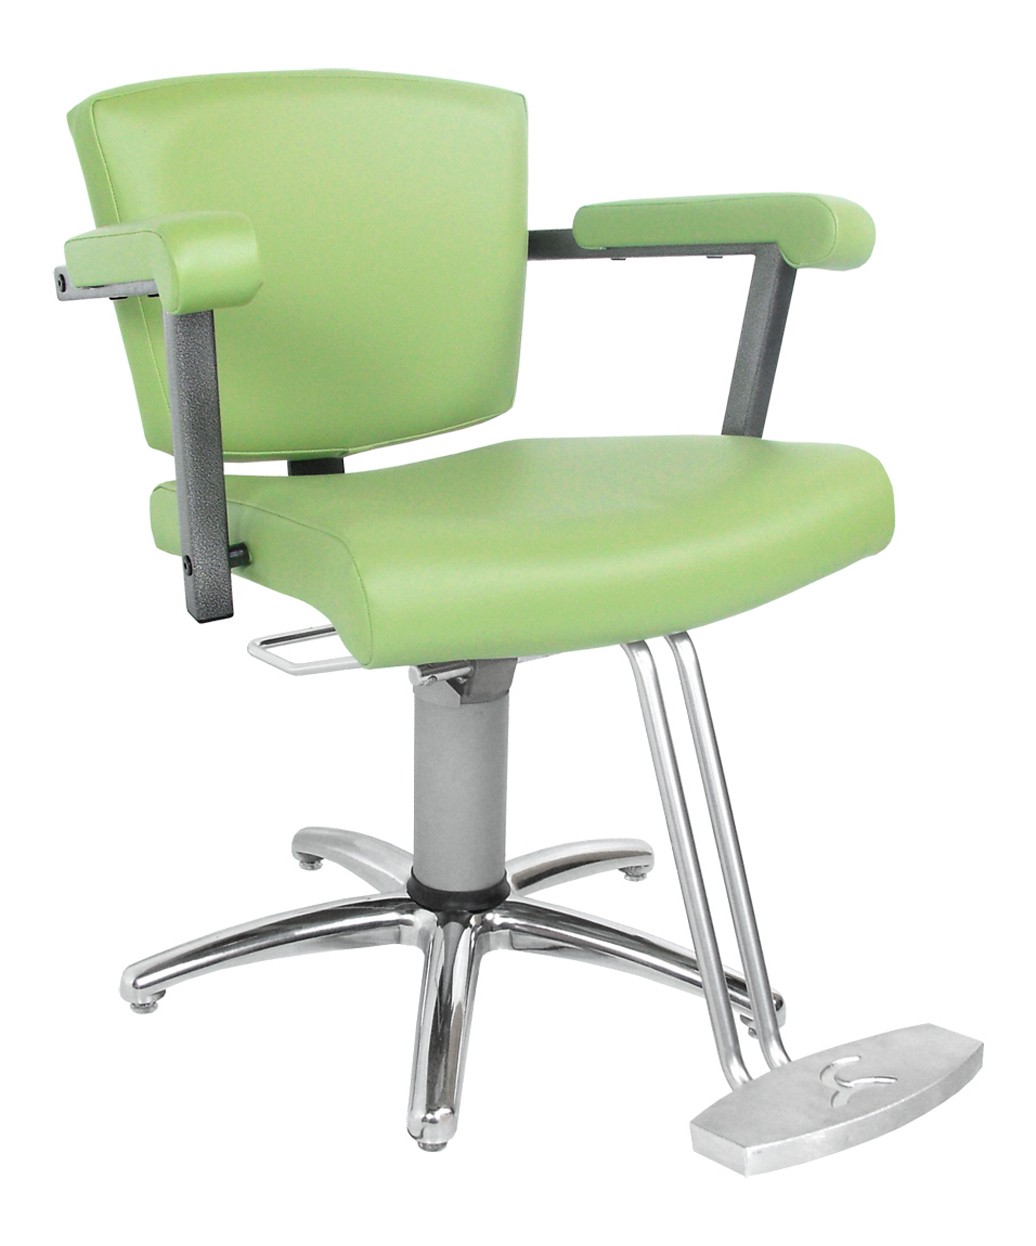 Collins 7600 Vittoria Styling Chair